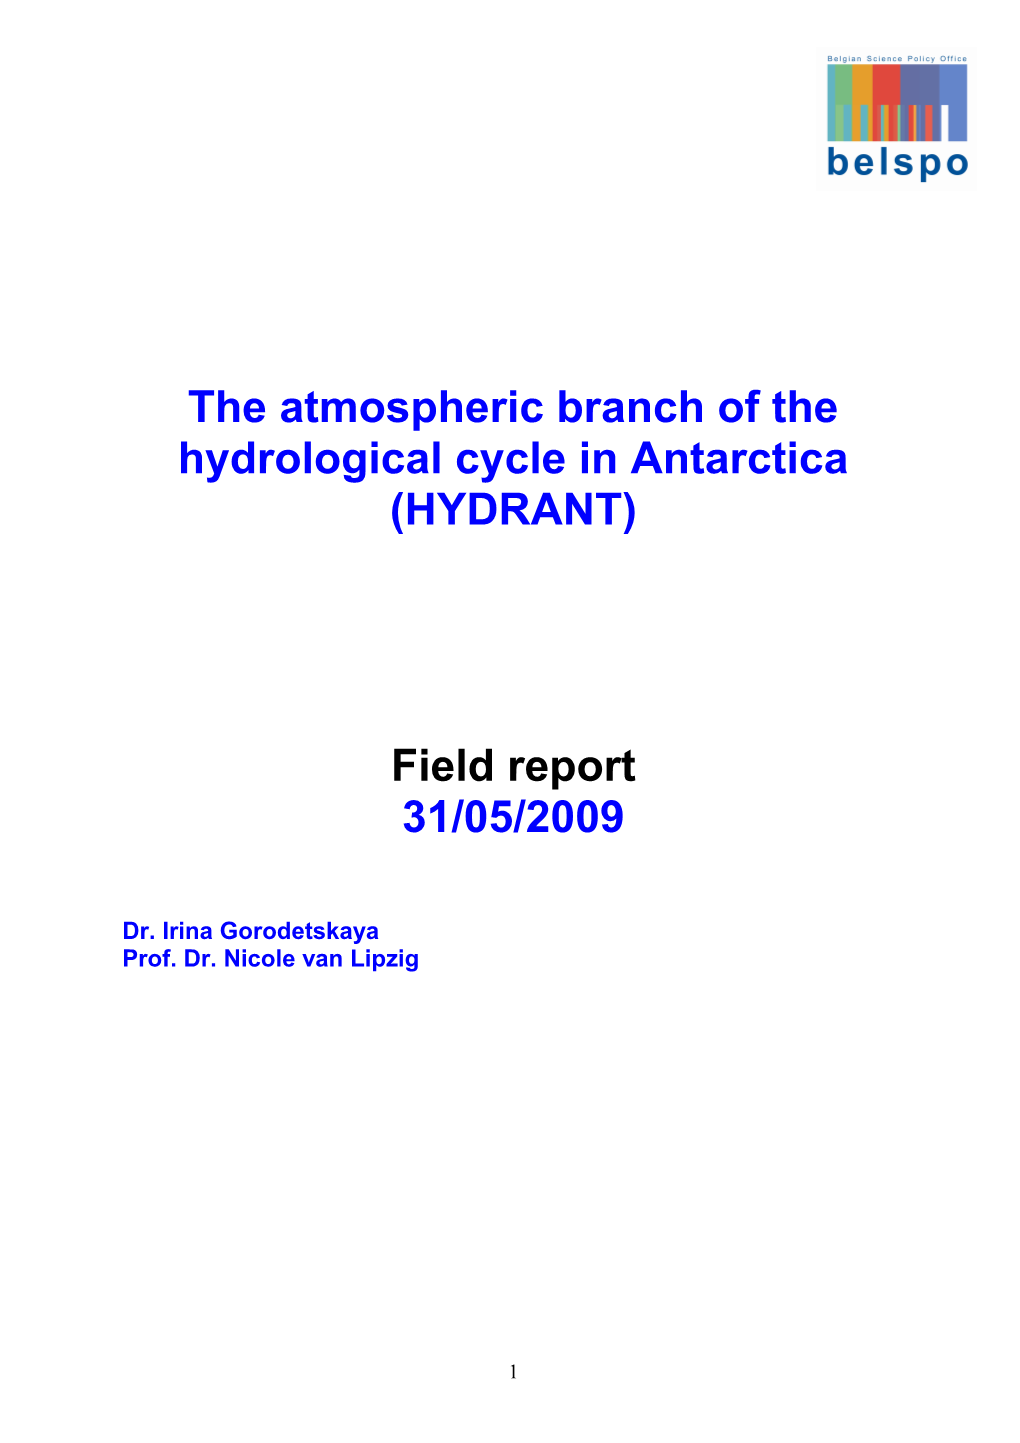 The Atmospheric Branch of the Hydrological Cycle in Antarctica(HYDRANT)